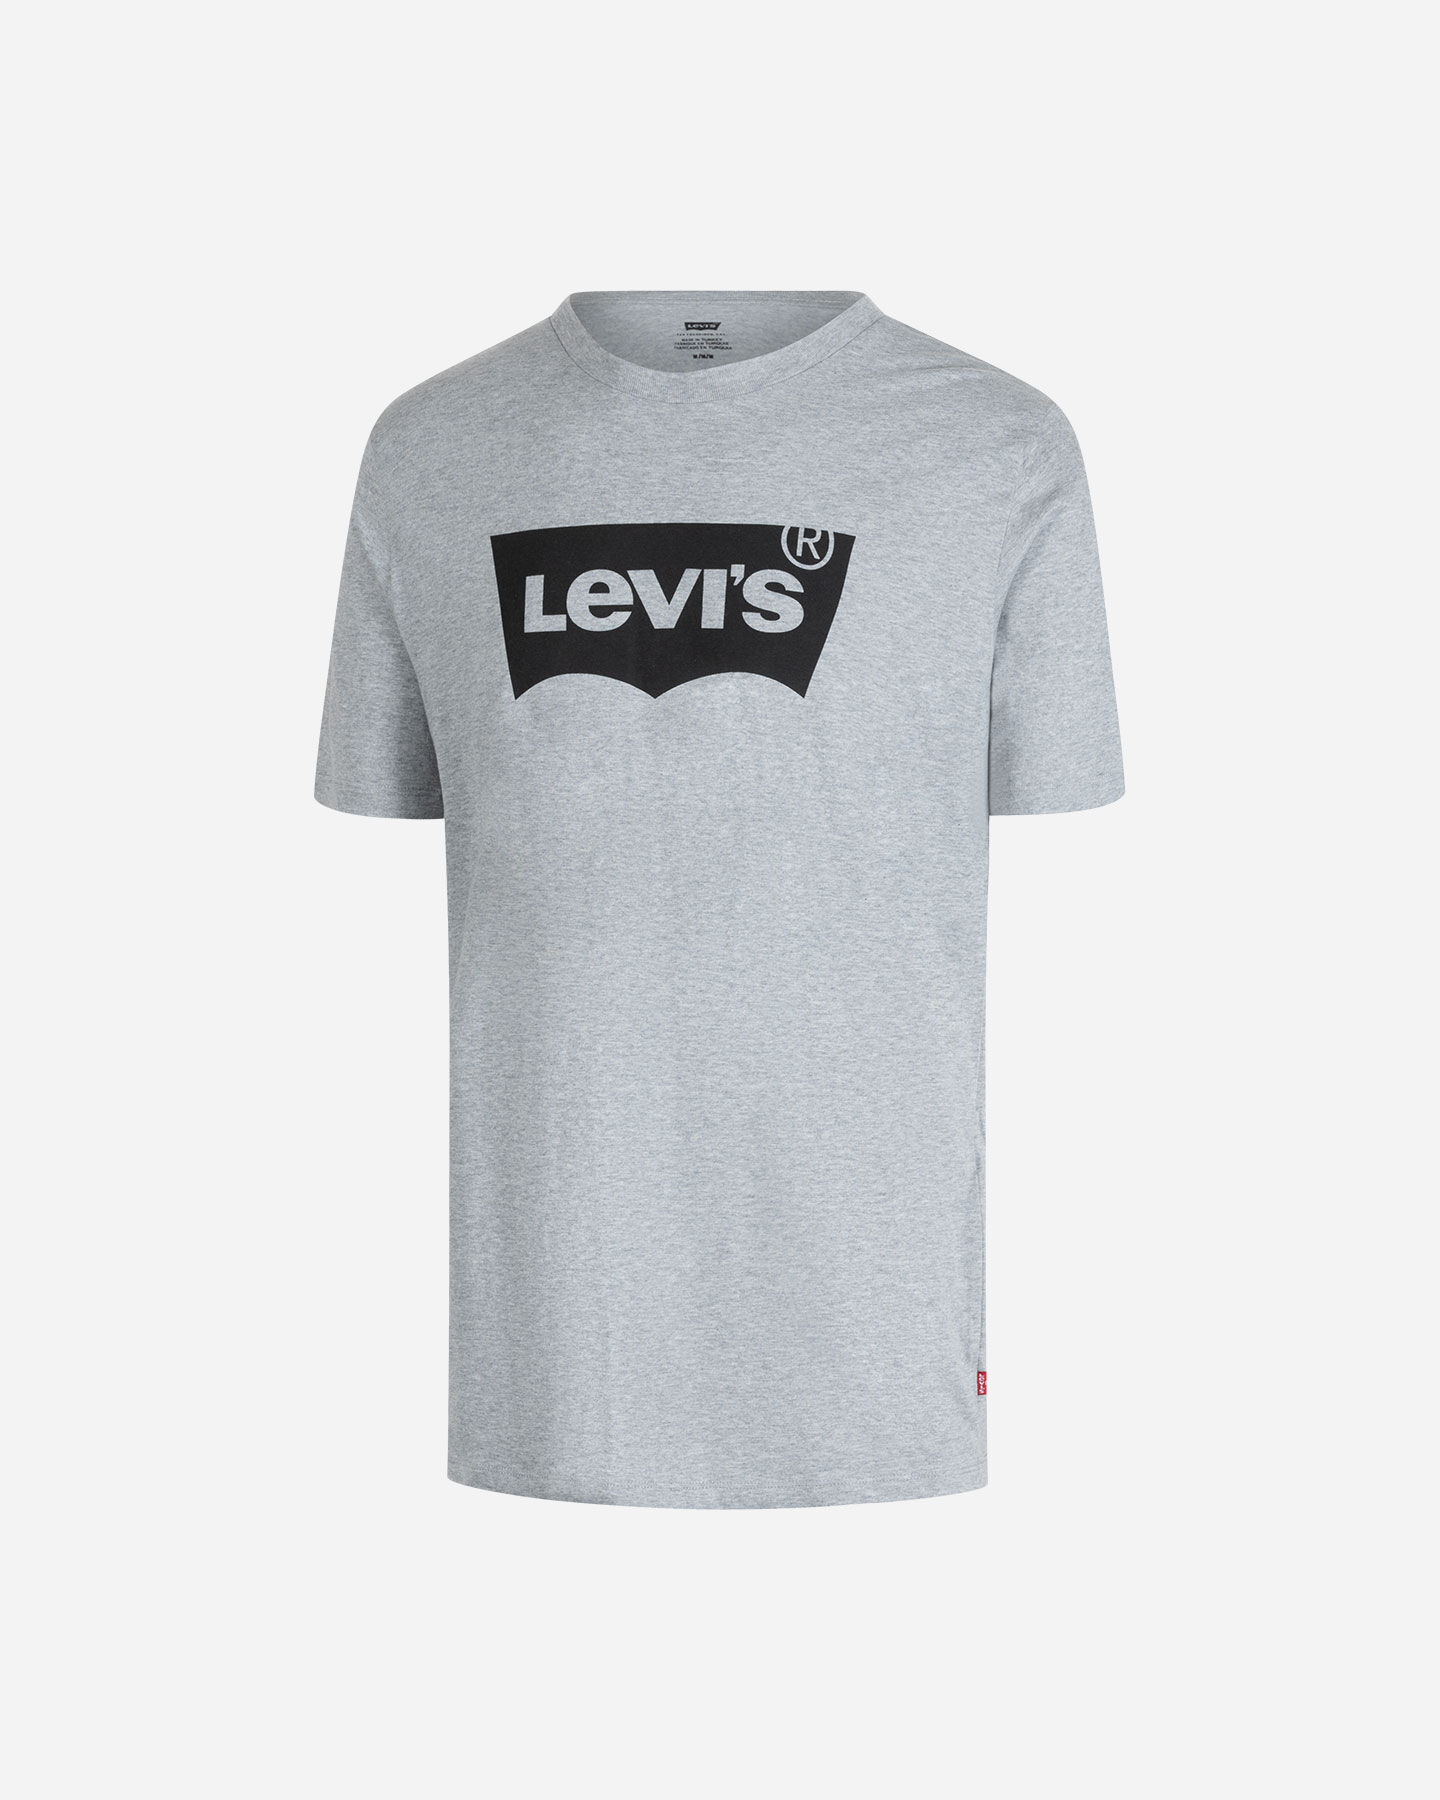  T-Shirt LEVI'S BATWING M S4127044|0068|S scatto 0